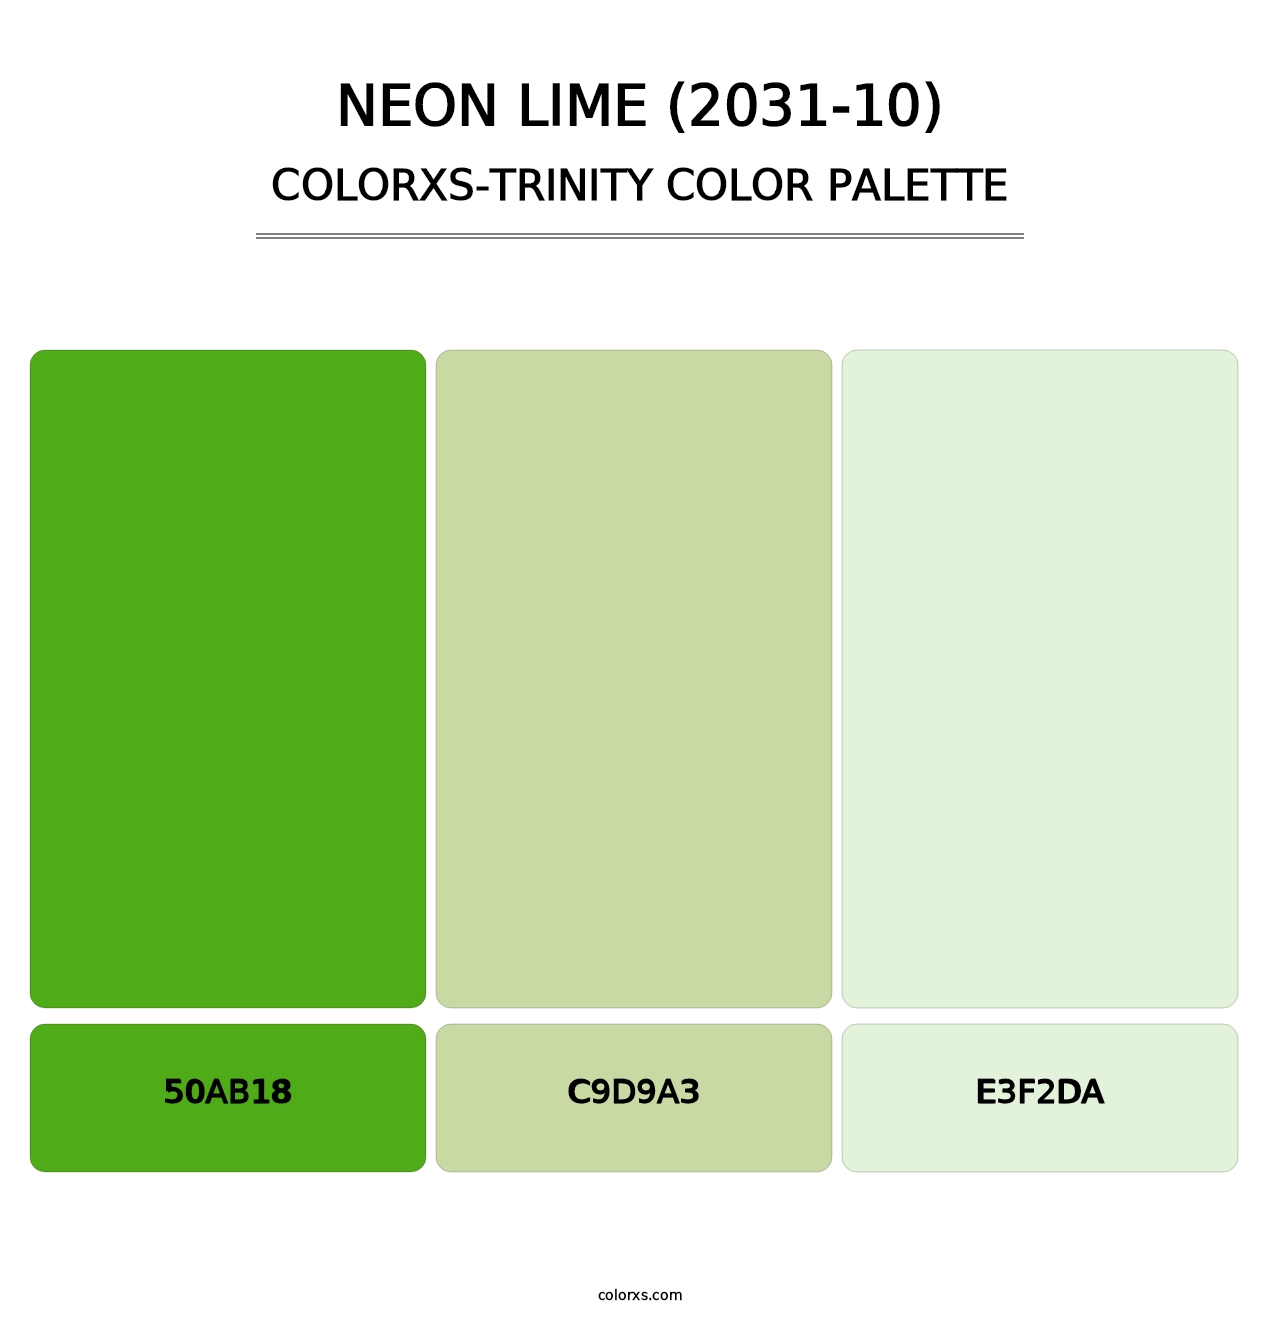 Neon Lime (2031-10) - Colorxs Trinity Palette